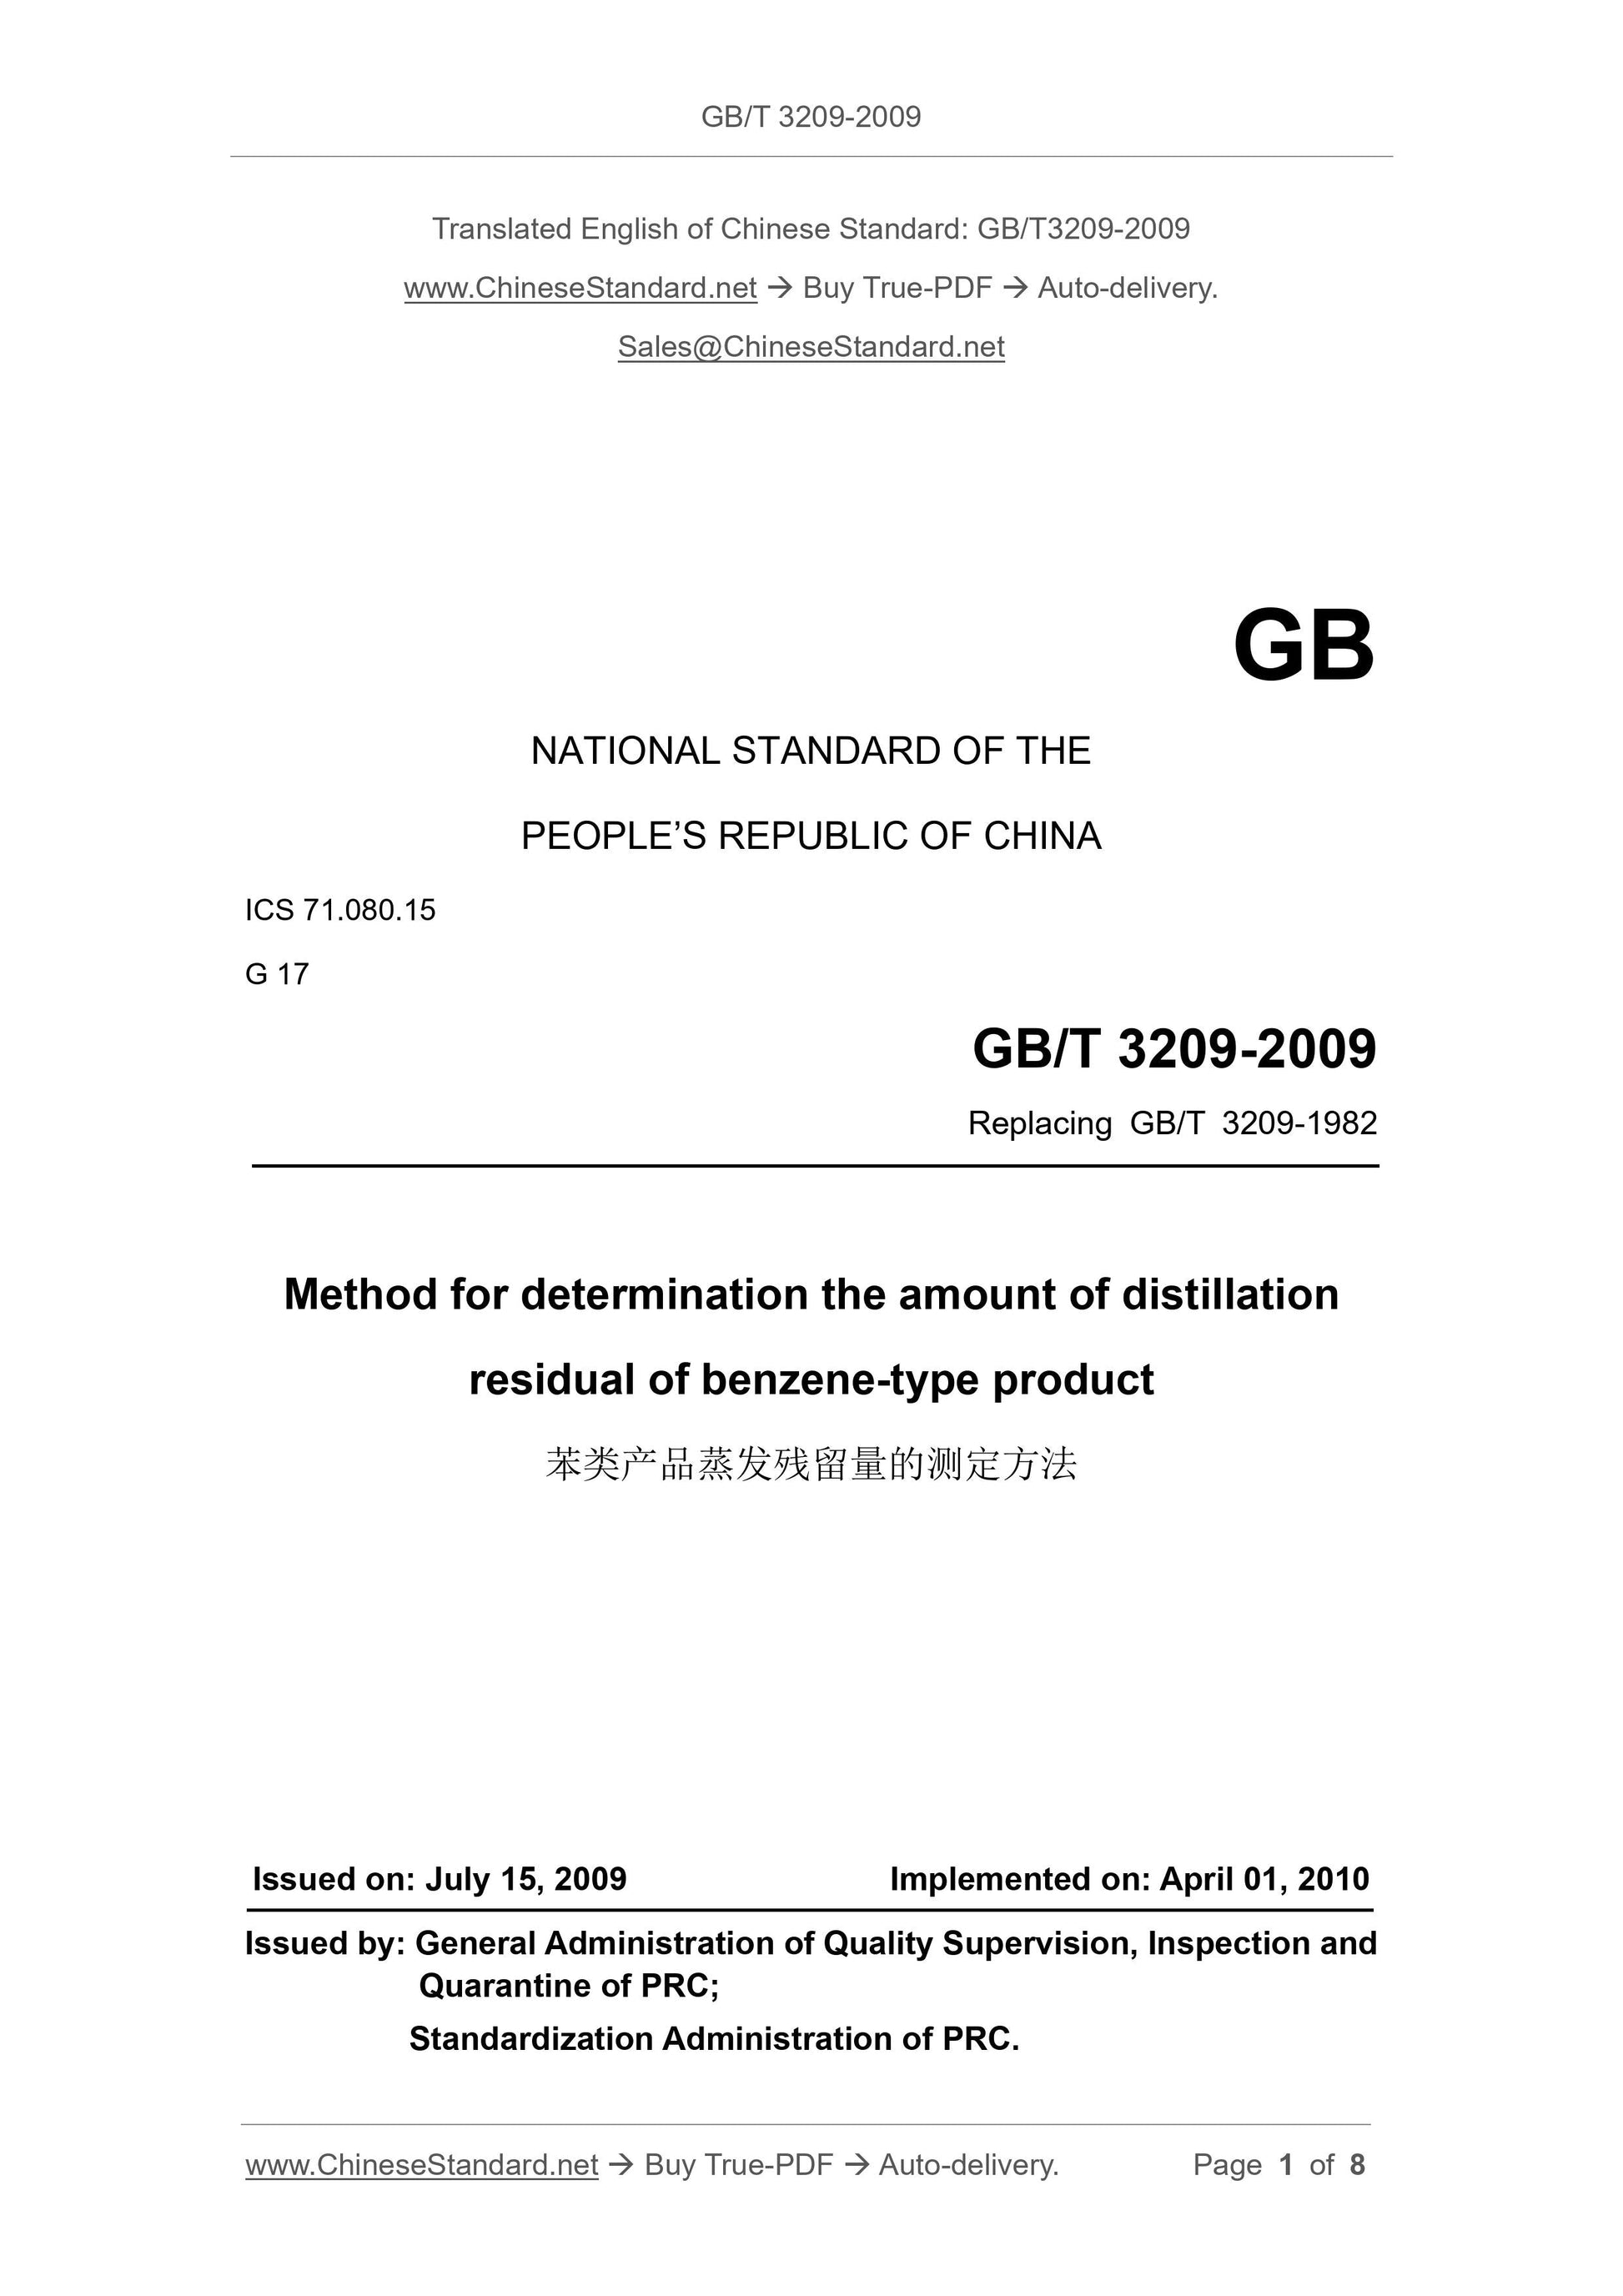 GB/T 3209-2009 Page 1